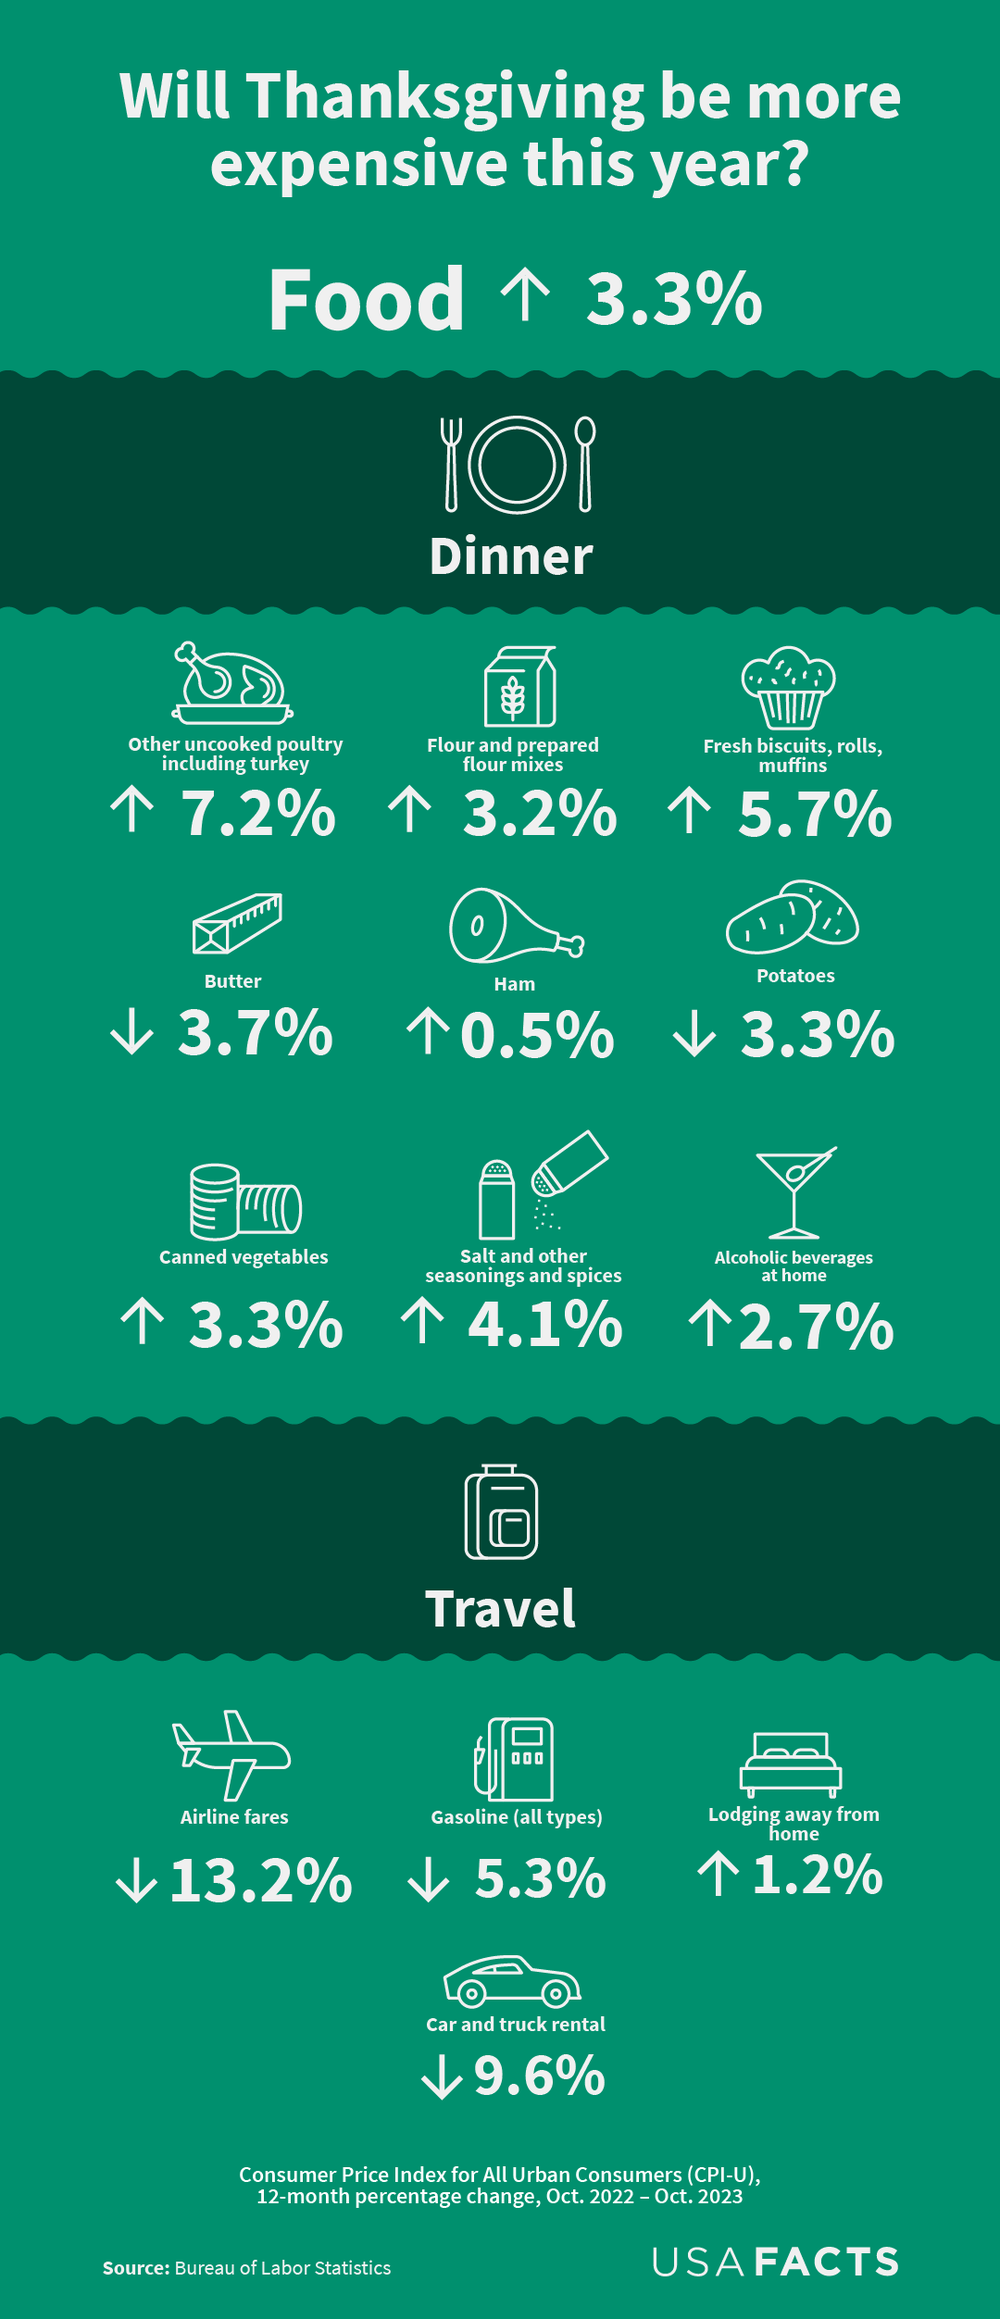 Infographic of the CPI (Consumer Price Index) for food and travel.